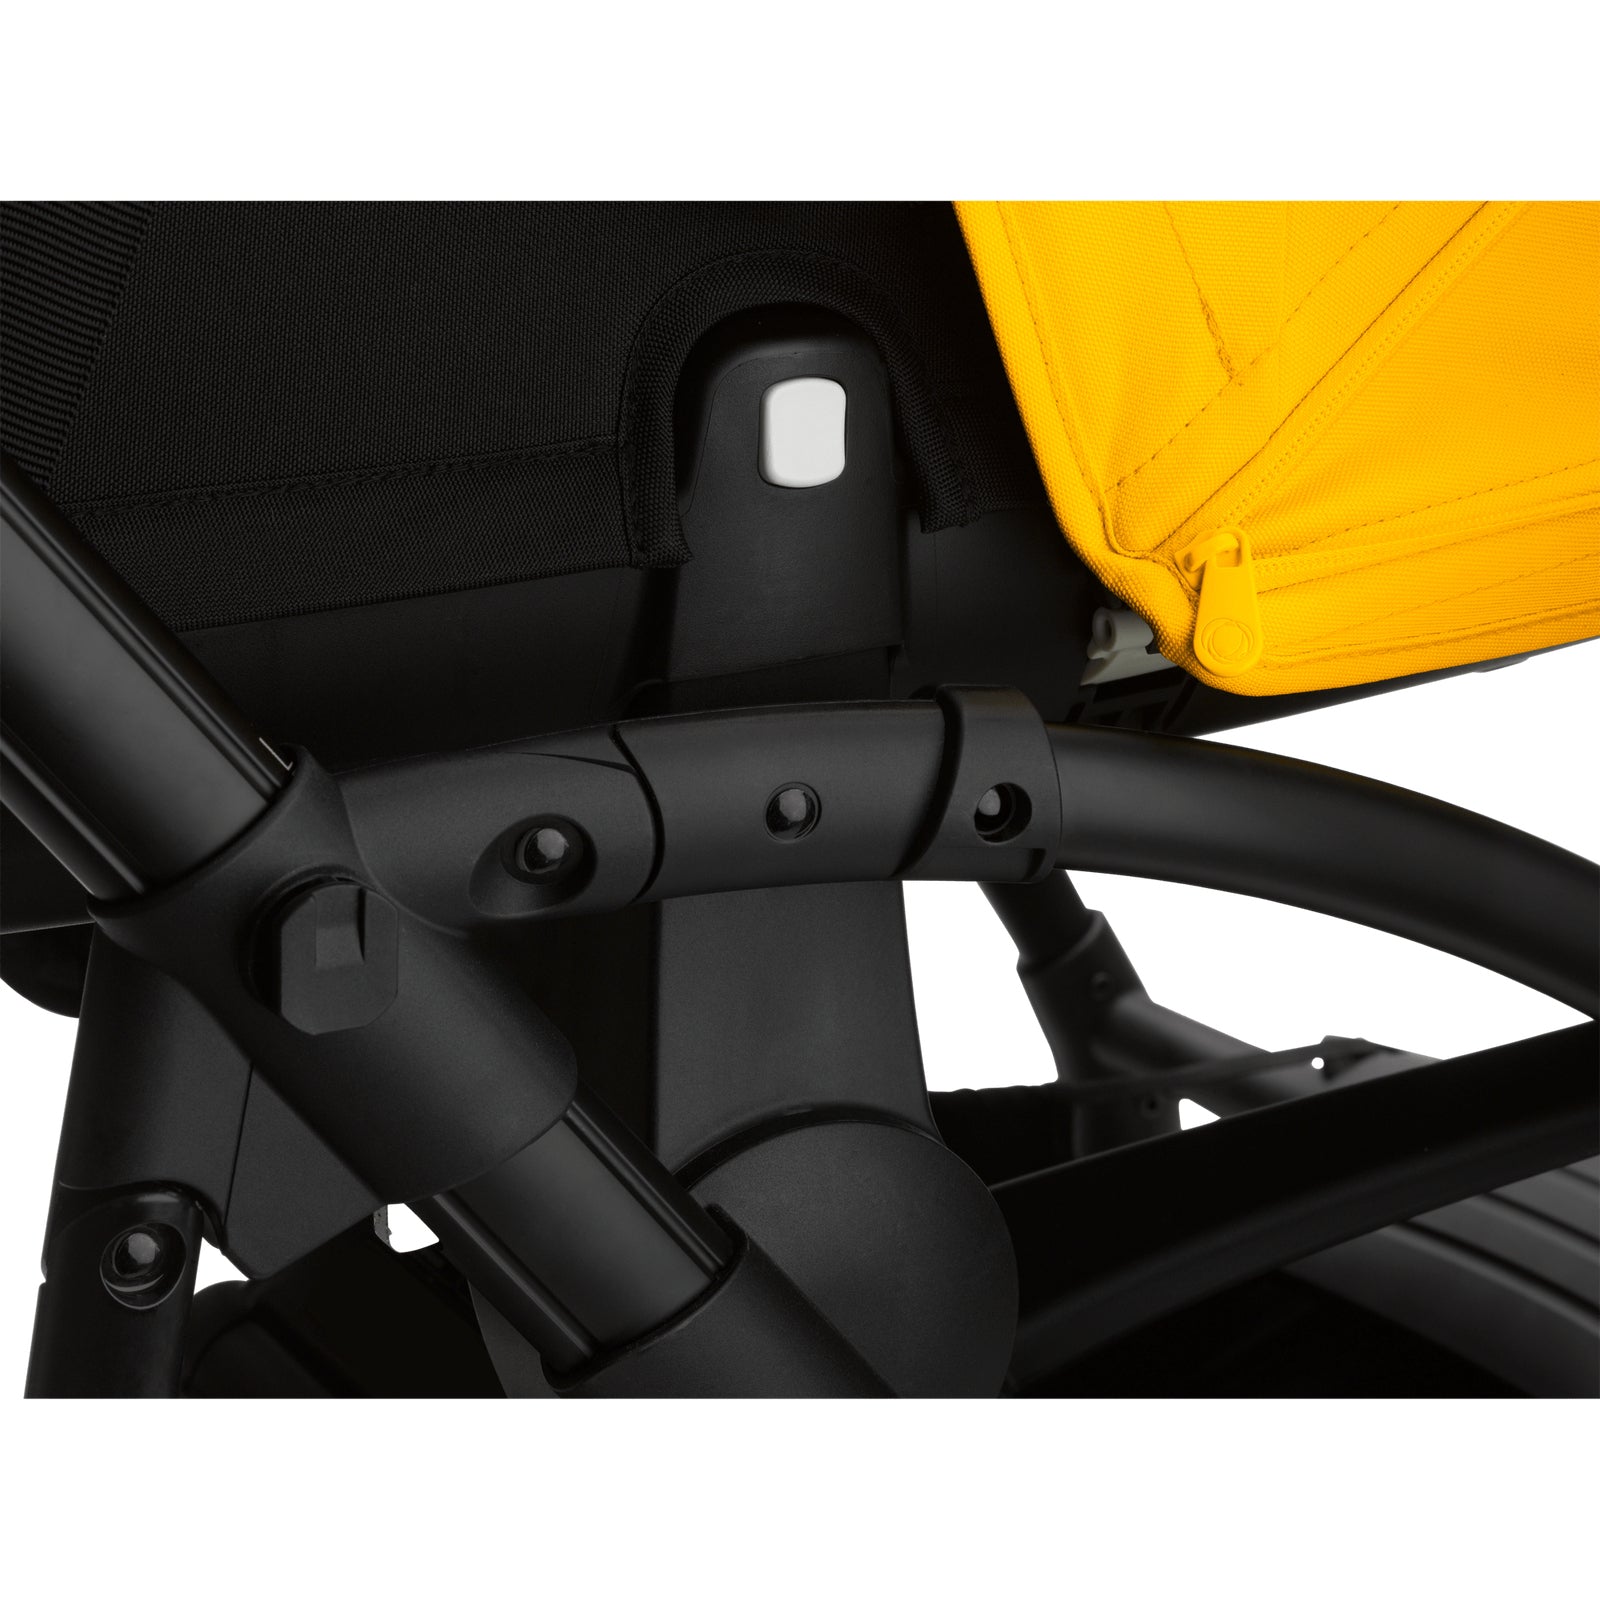 Bugaboo Bee 6 Carrycot and Seat Pushchair - Lemon Yellow